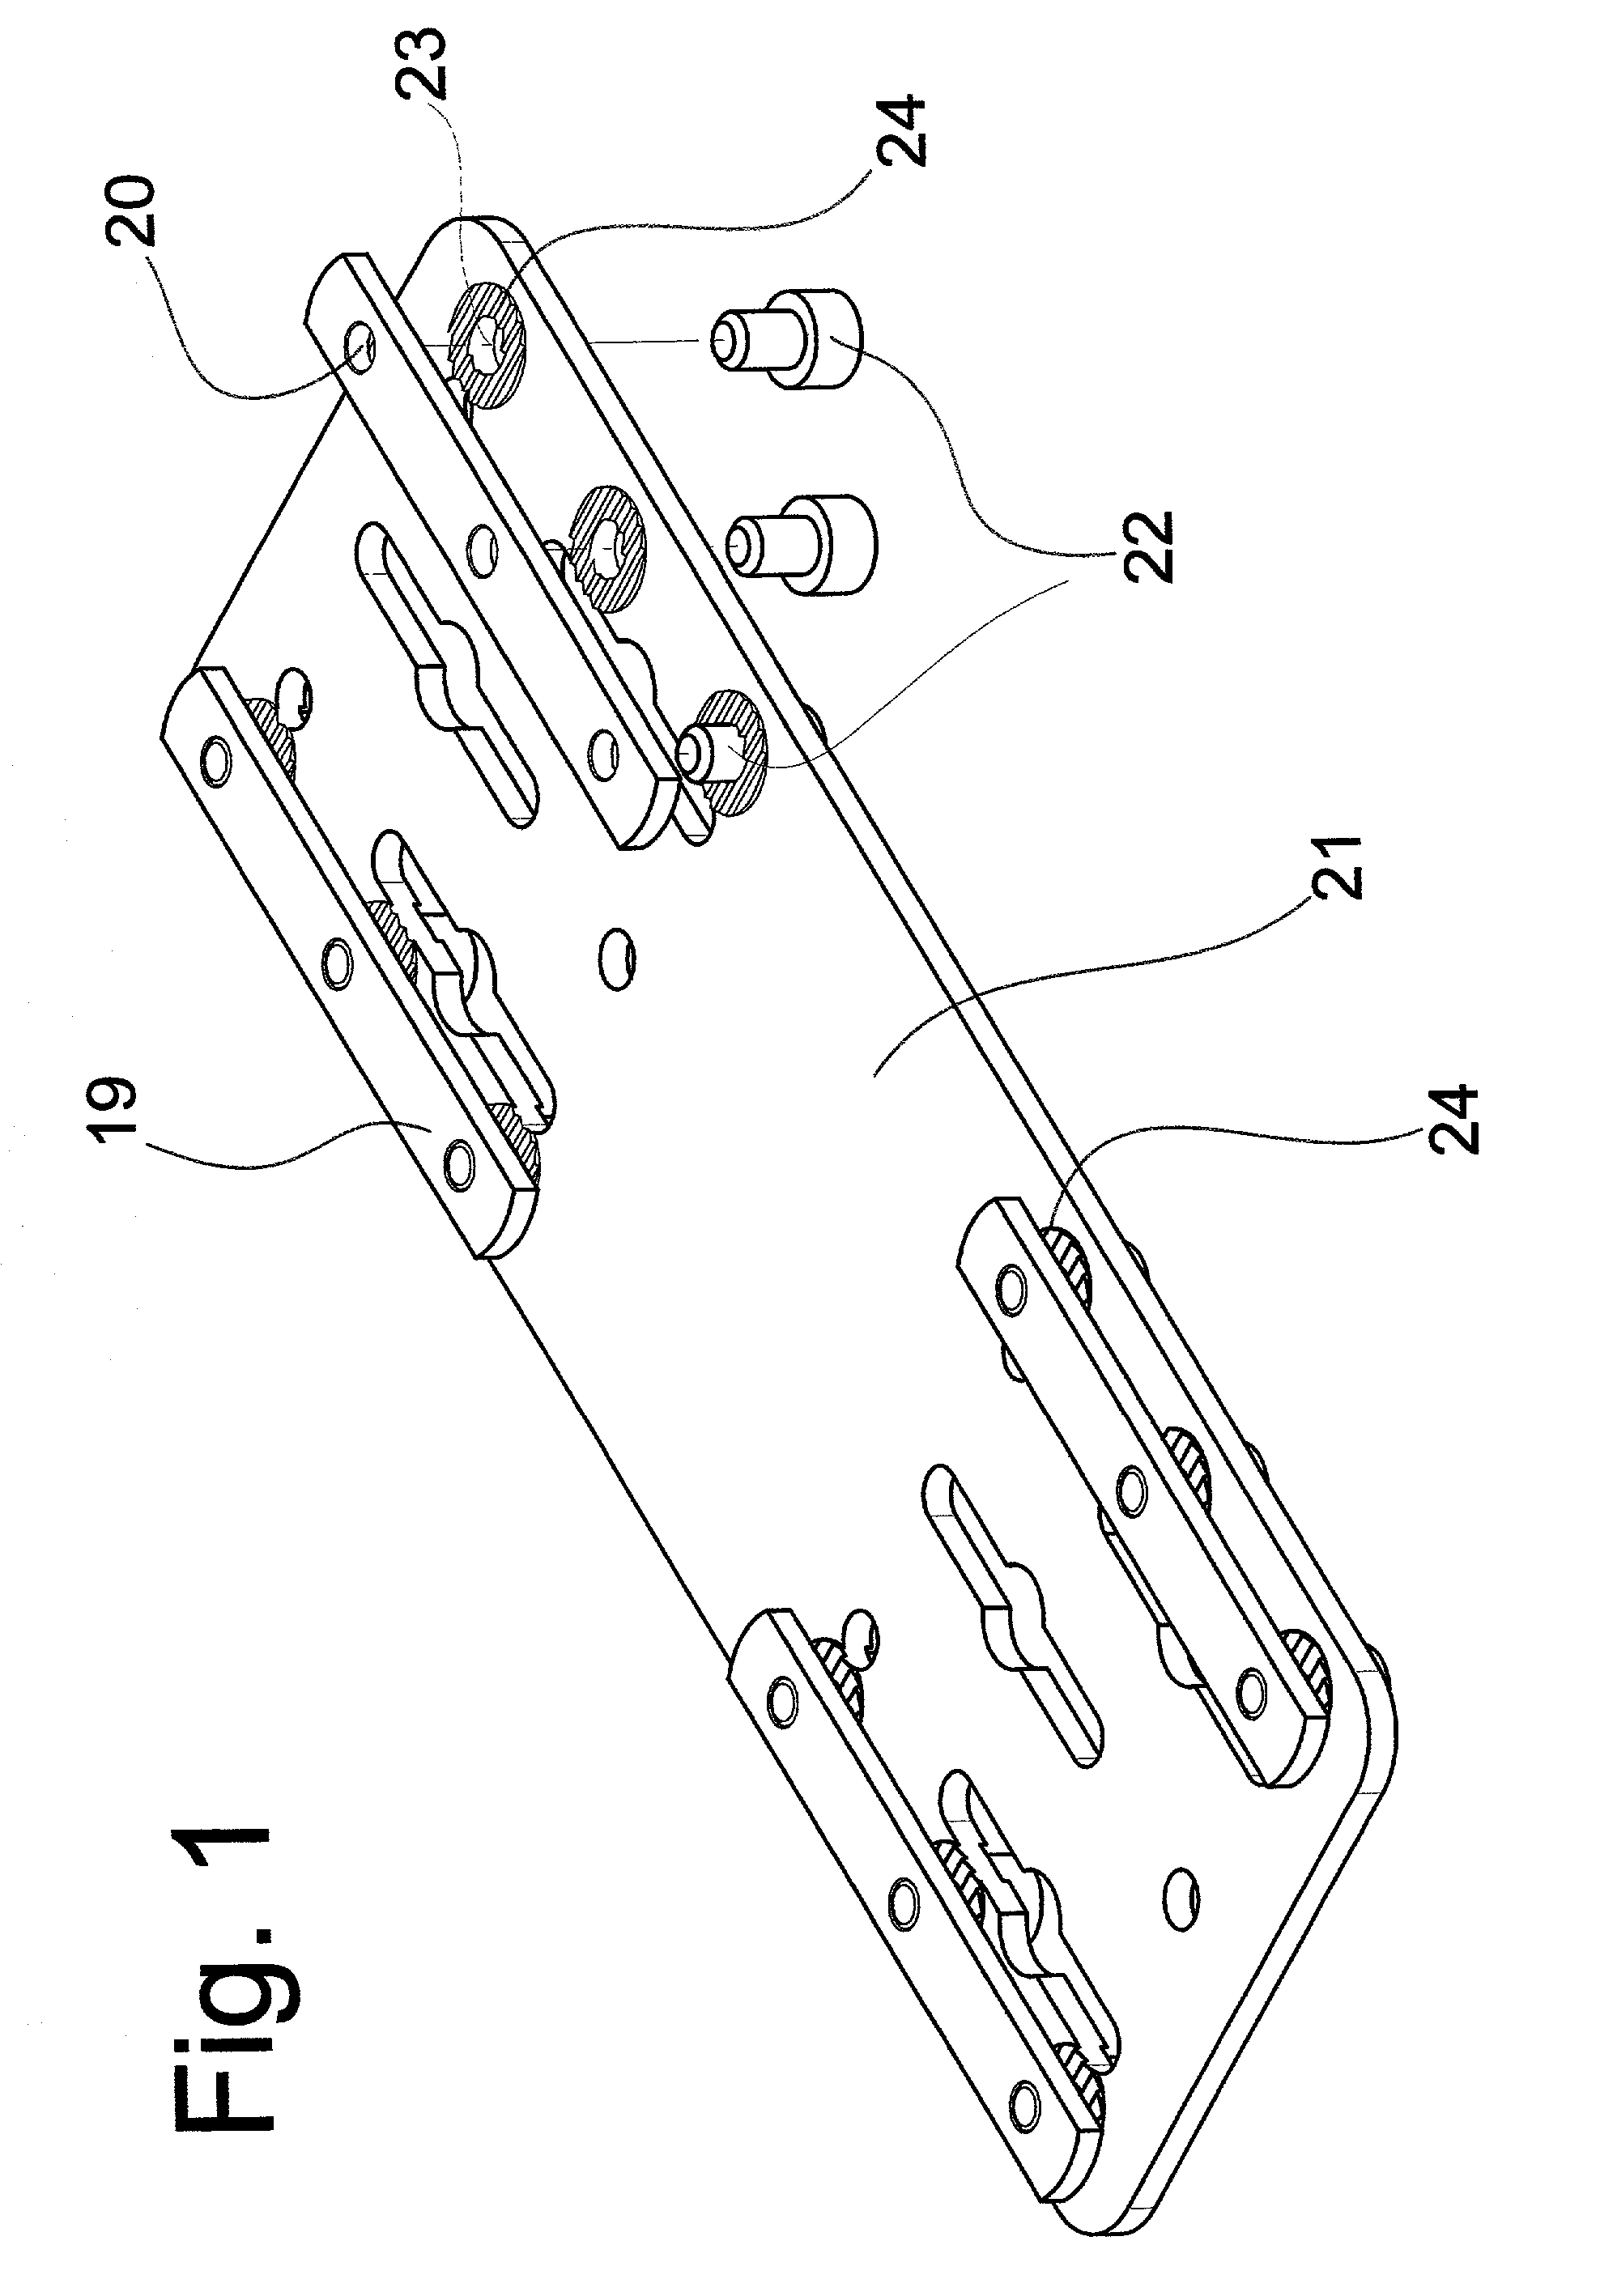 Device for connecting and blocking hollow elements for the formation of fluid distribution plants